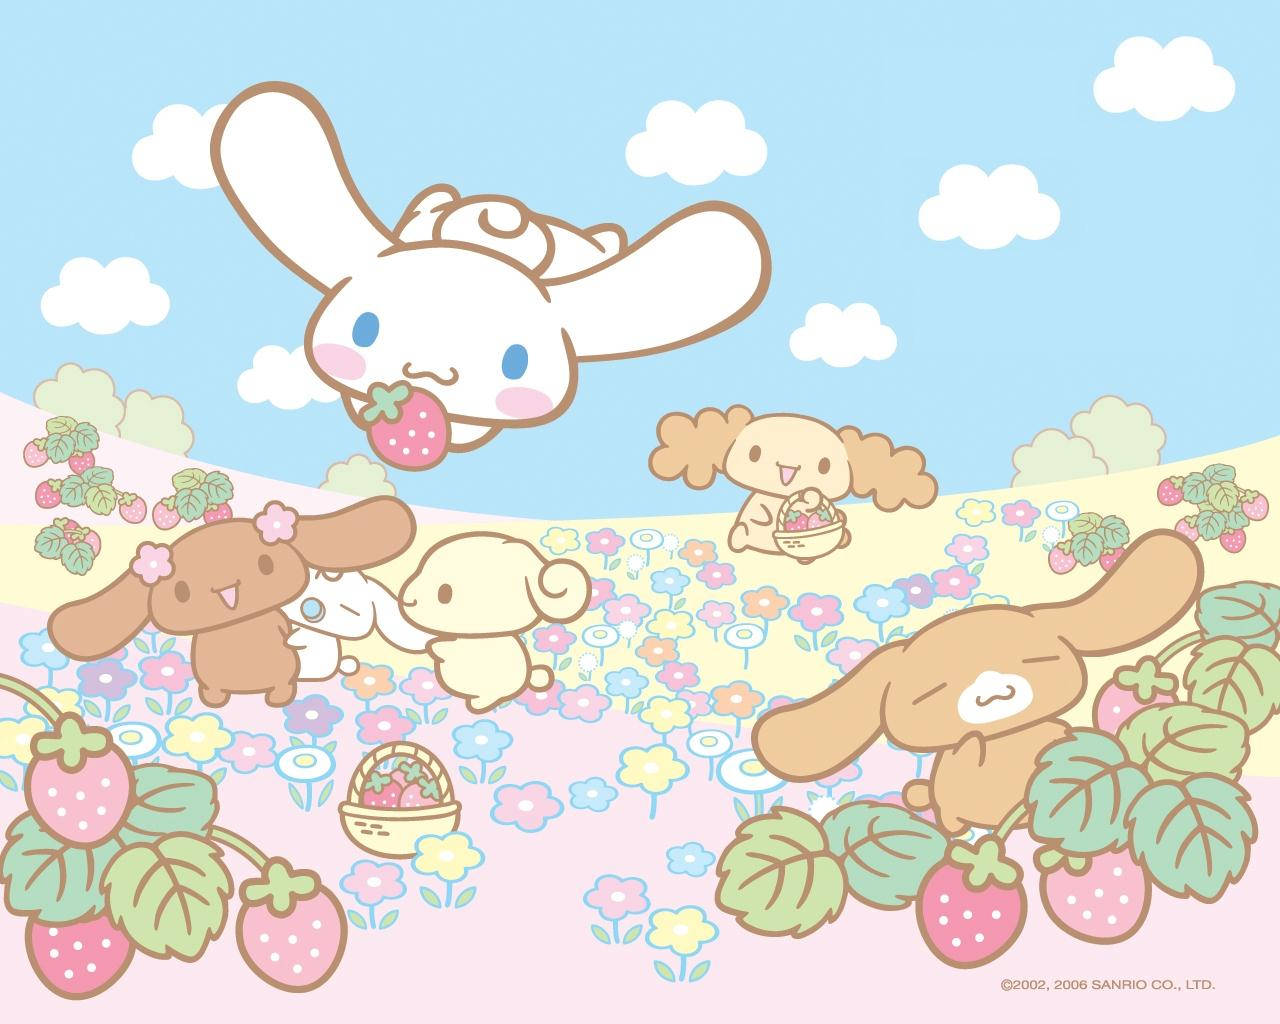 Experience Total Adorableness With Sanrio's Cinnamoroll And Cinnamoangels Background